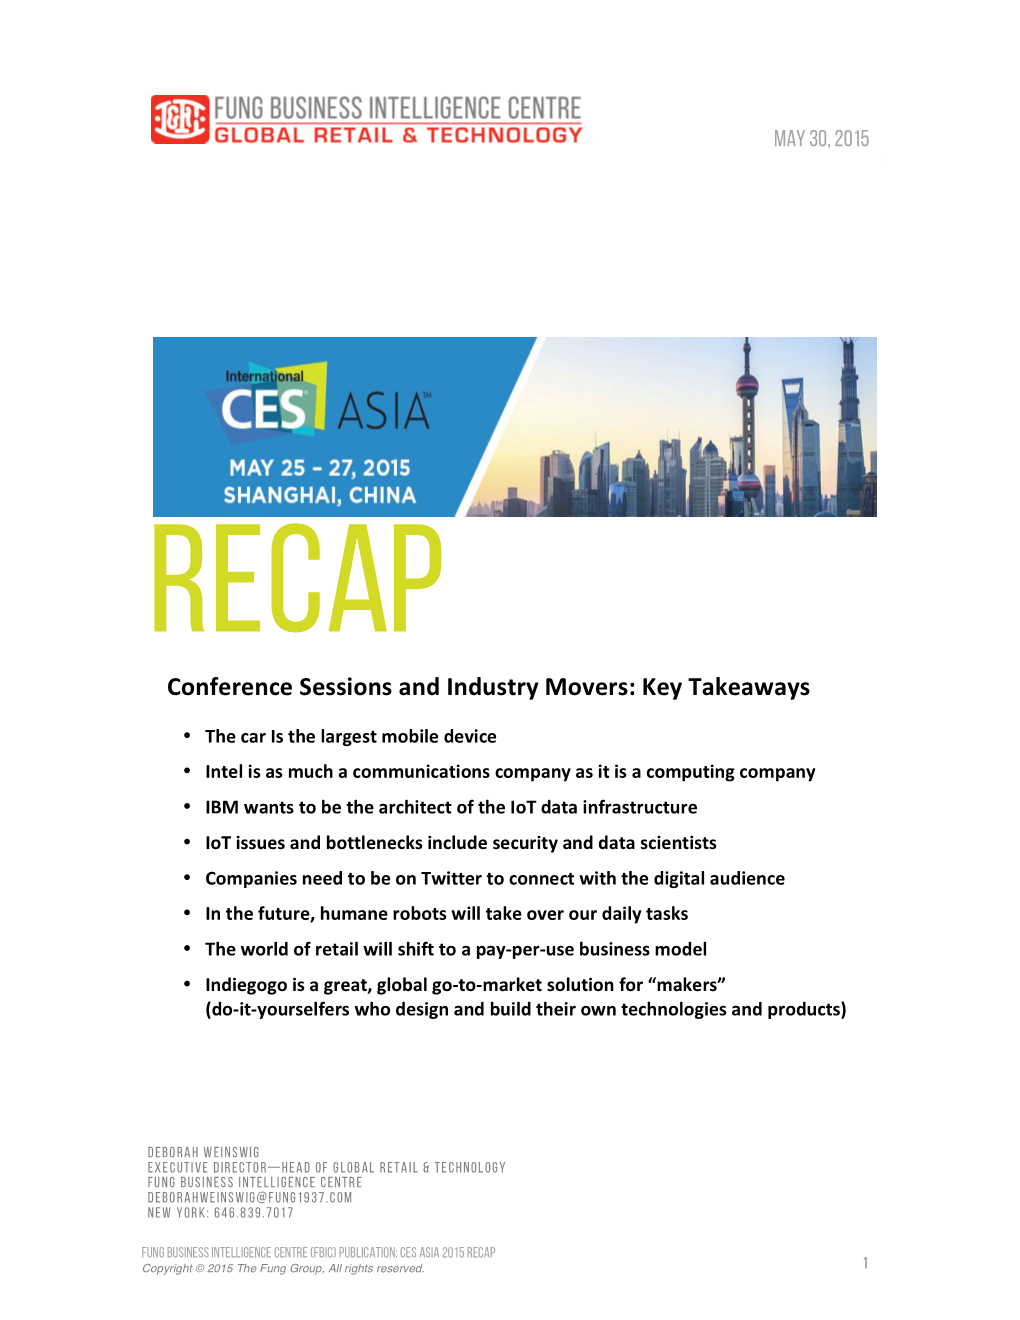 RECAP Conference Sessions and Industry Movers: Key Takeaways